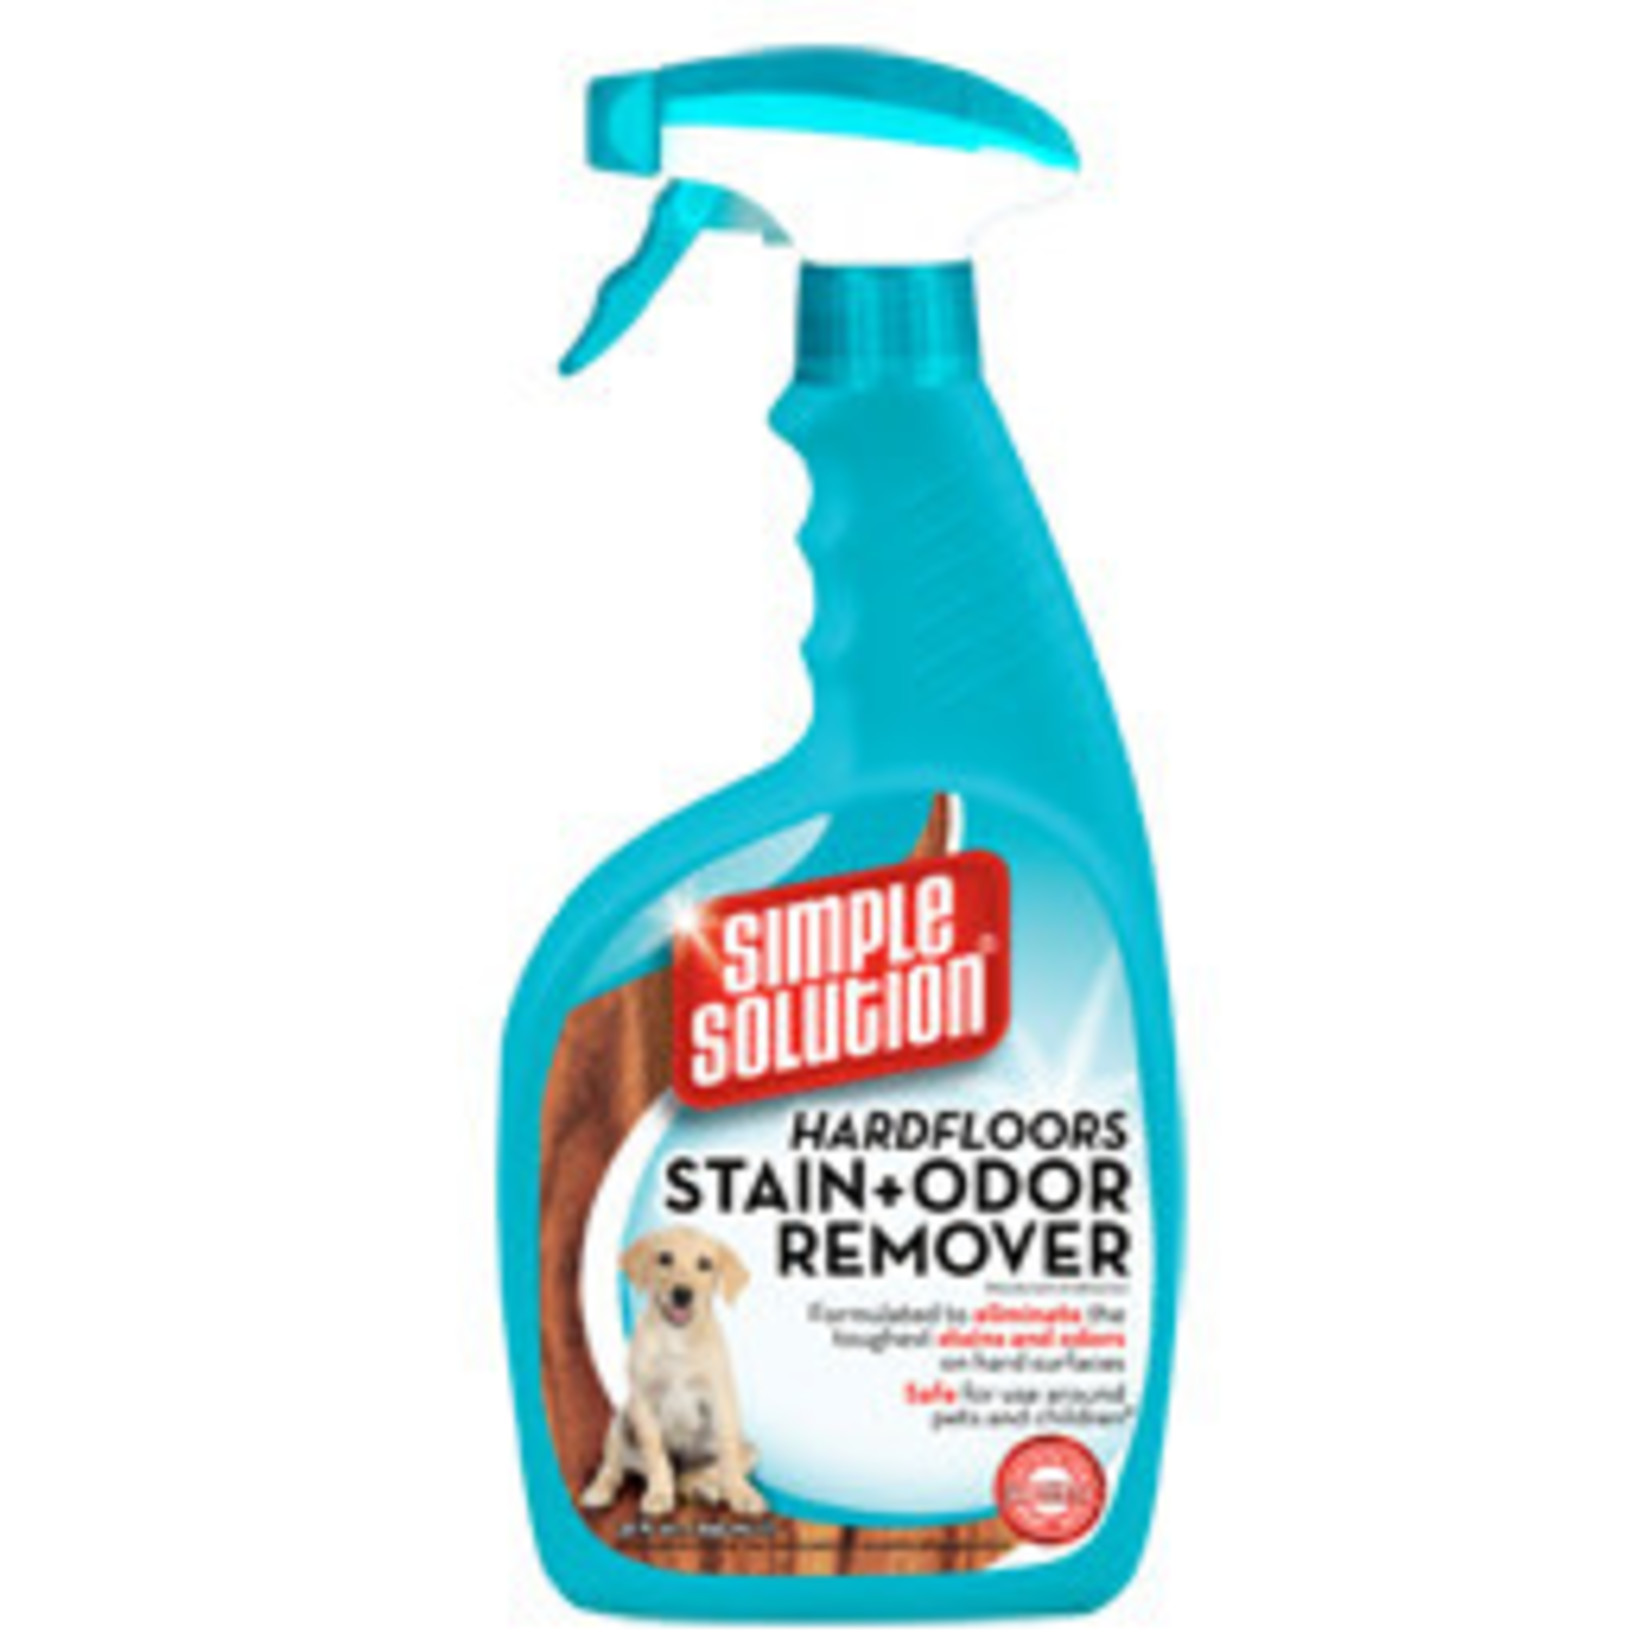 Simple Solution Hardfloors Stain & Odour Remover, 750ml